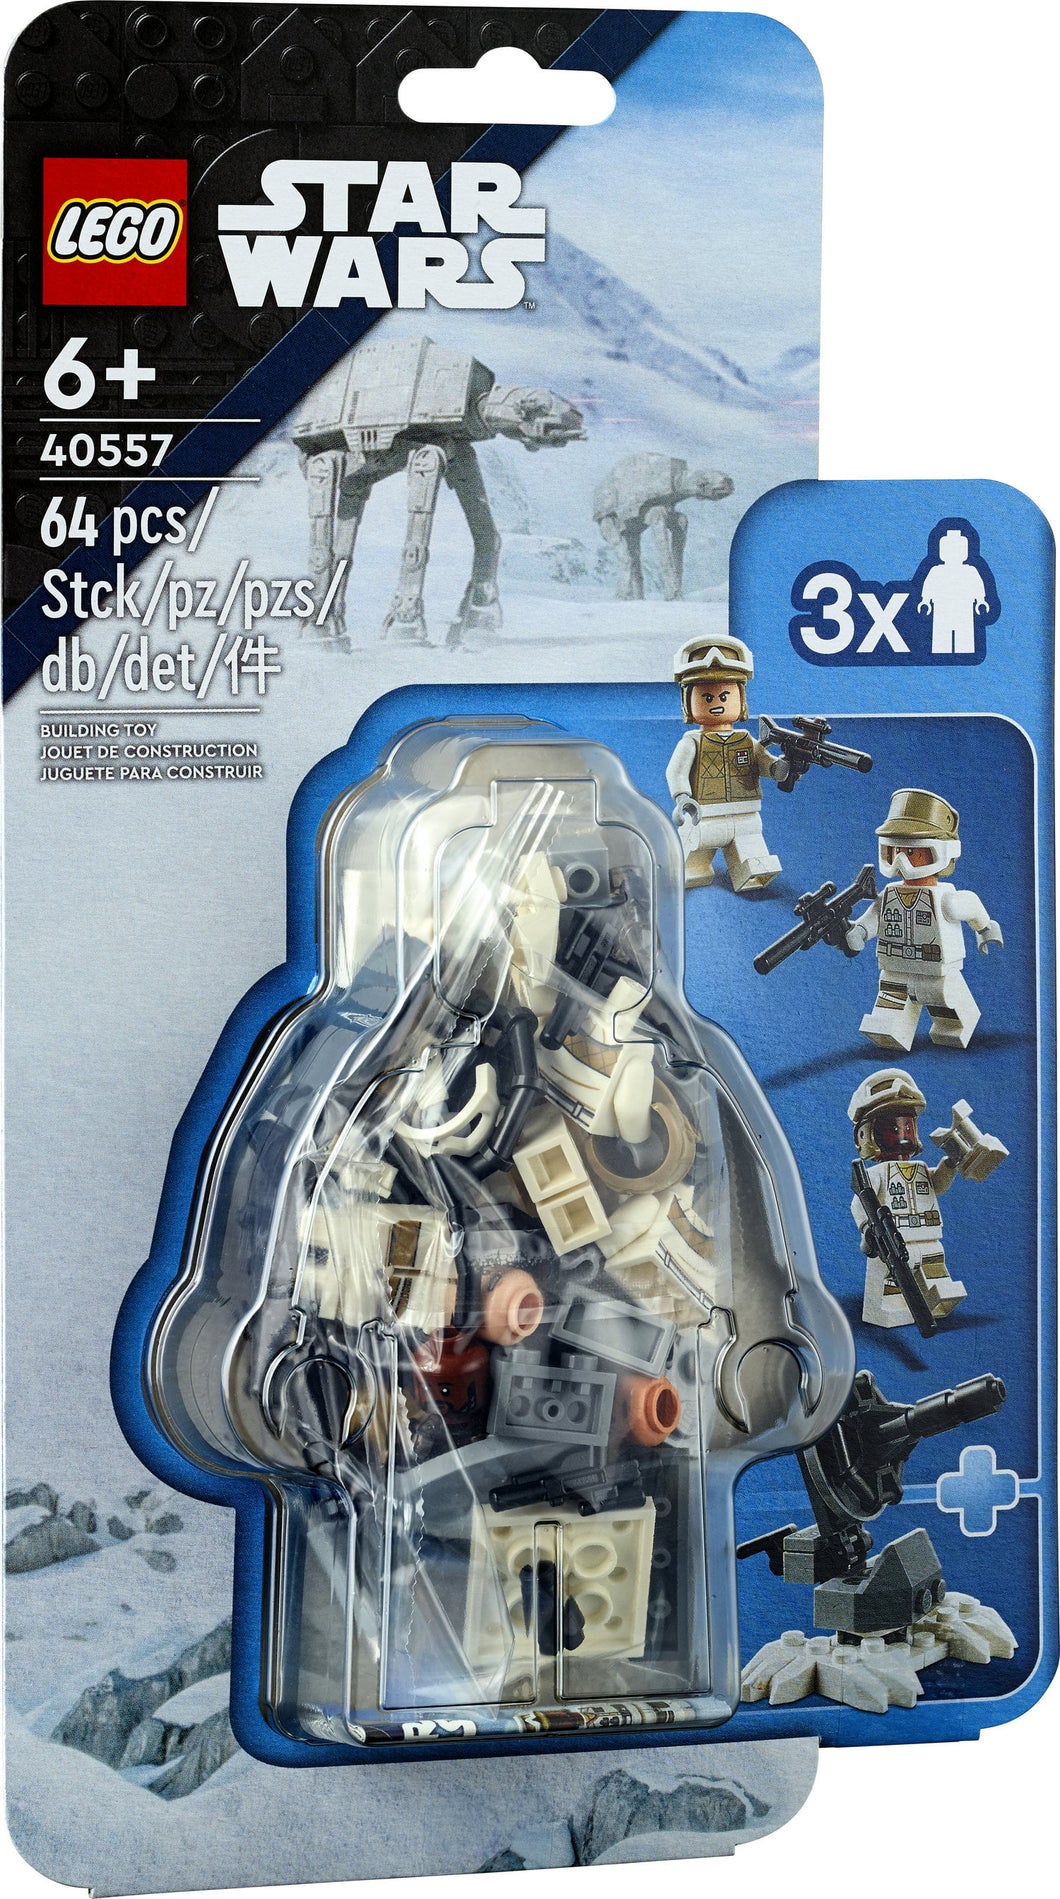 Lego Star Wars 40557 Defense of Hoth Battle Pack